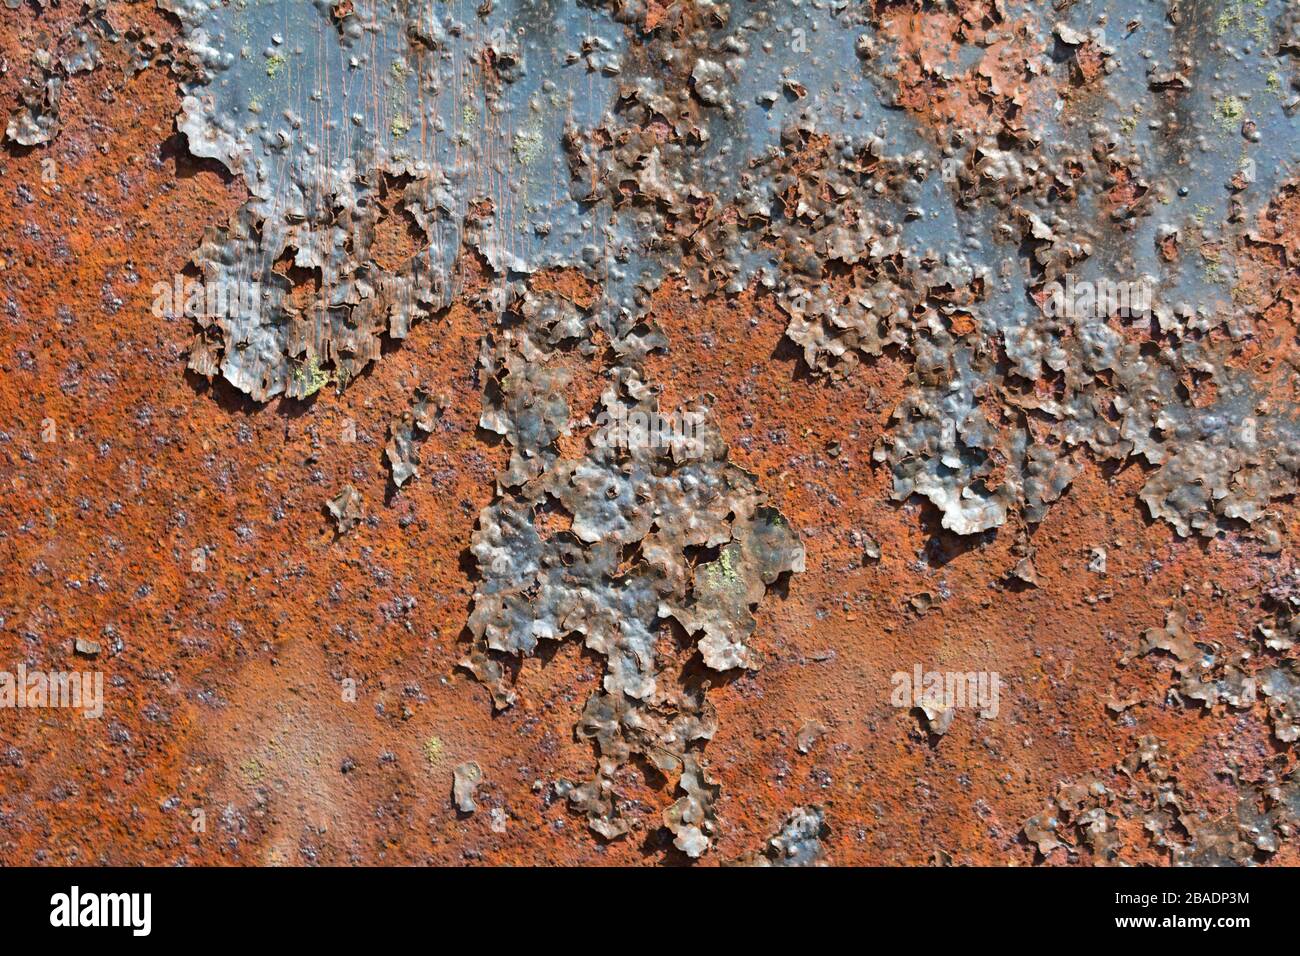 Rusty metal surface with flaking old dark paint Stock Photo